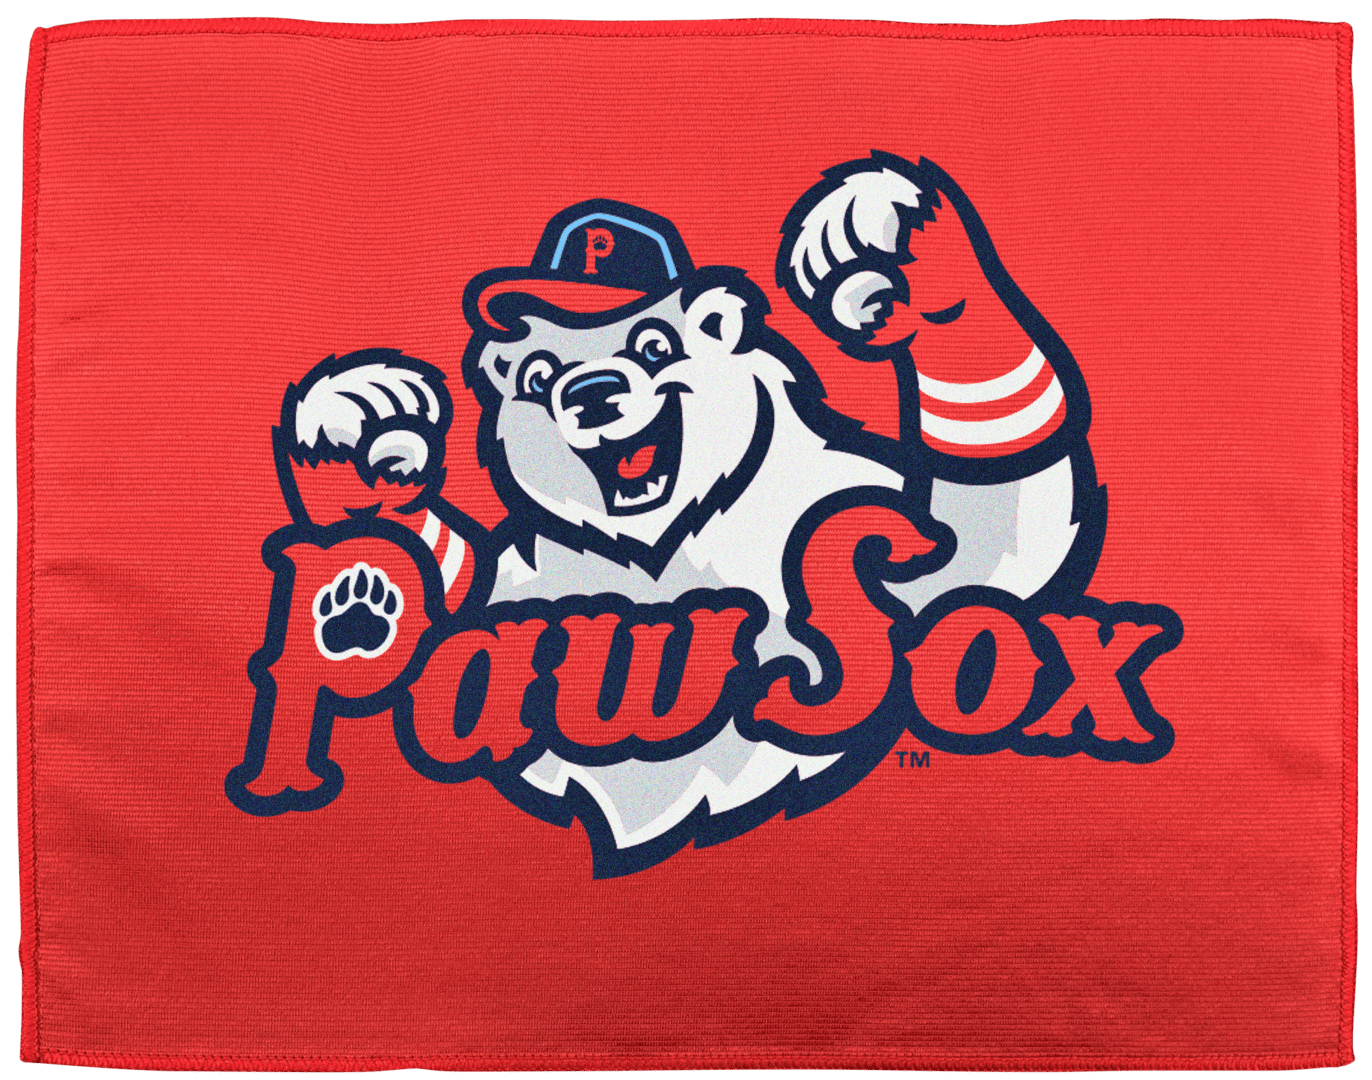 Pawsox text on red color cloth